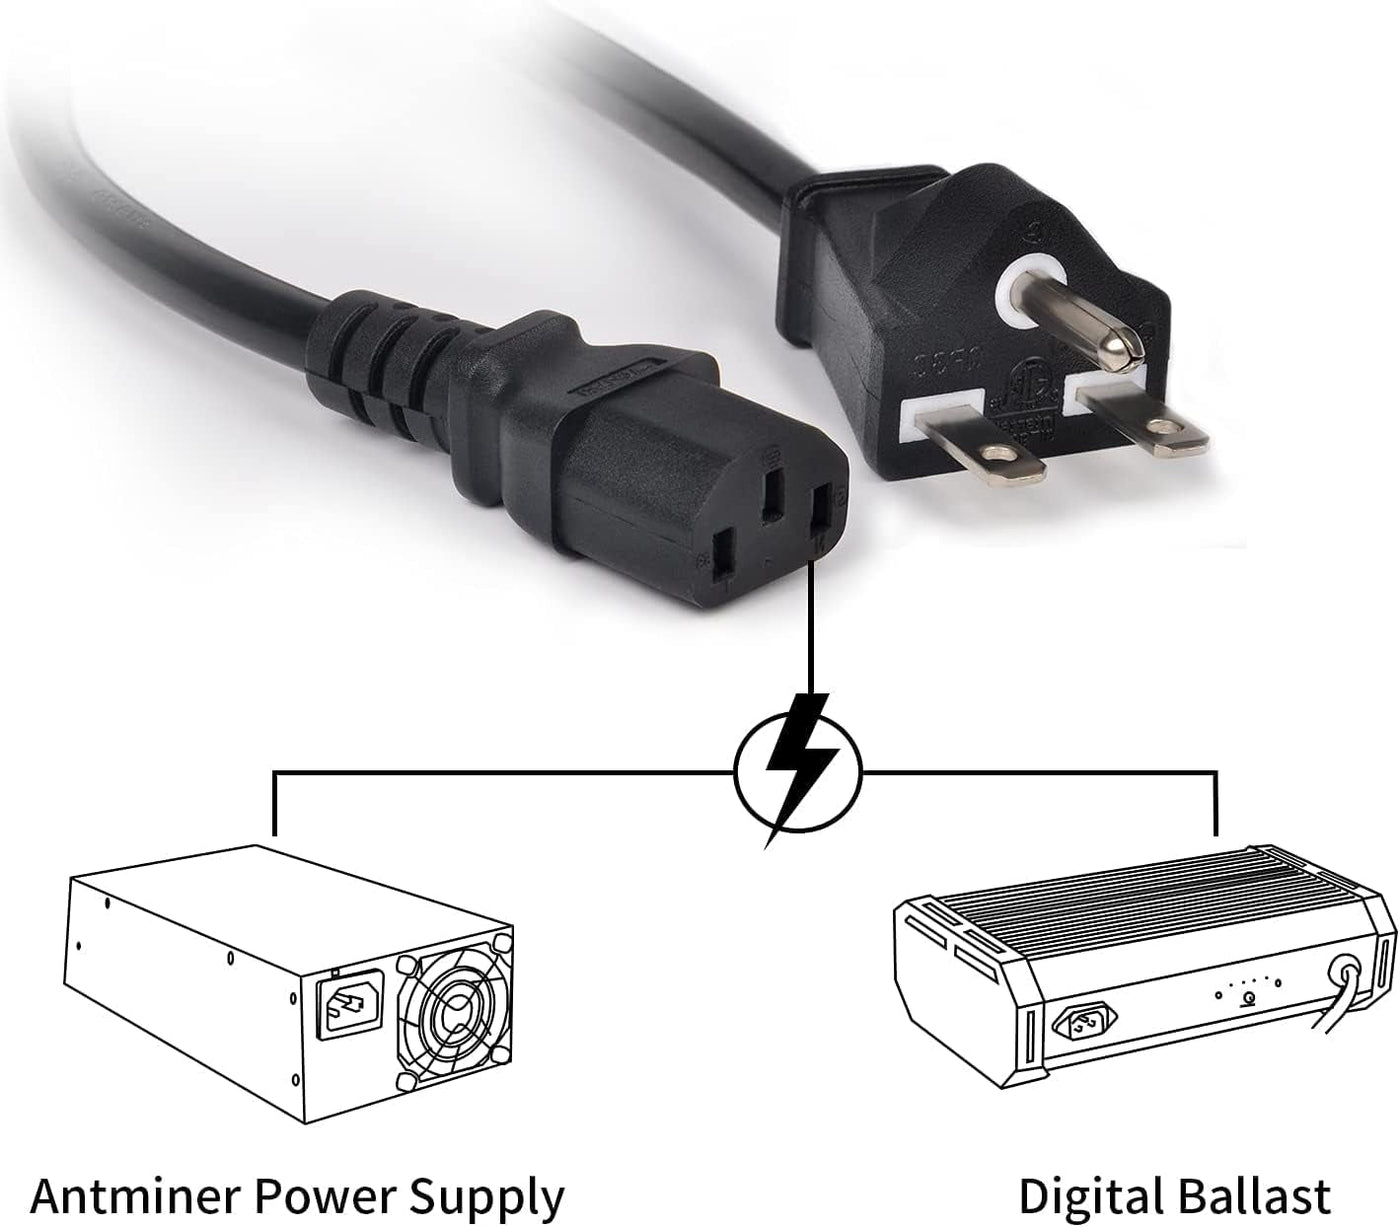 BITMAIN APW3++ APW7 220-250V 5Foot Heavy Duty C13 Power Cord for Antminer S19,A3, S9, or D3